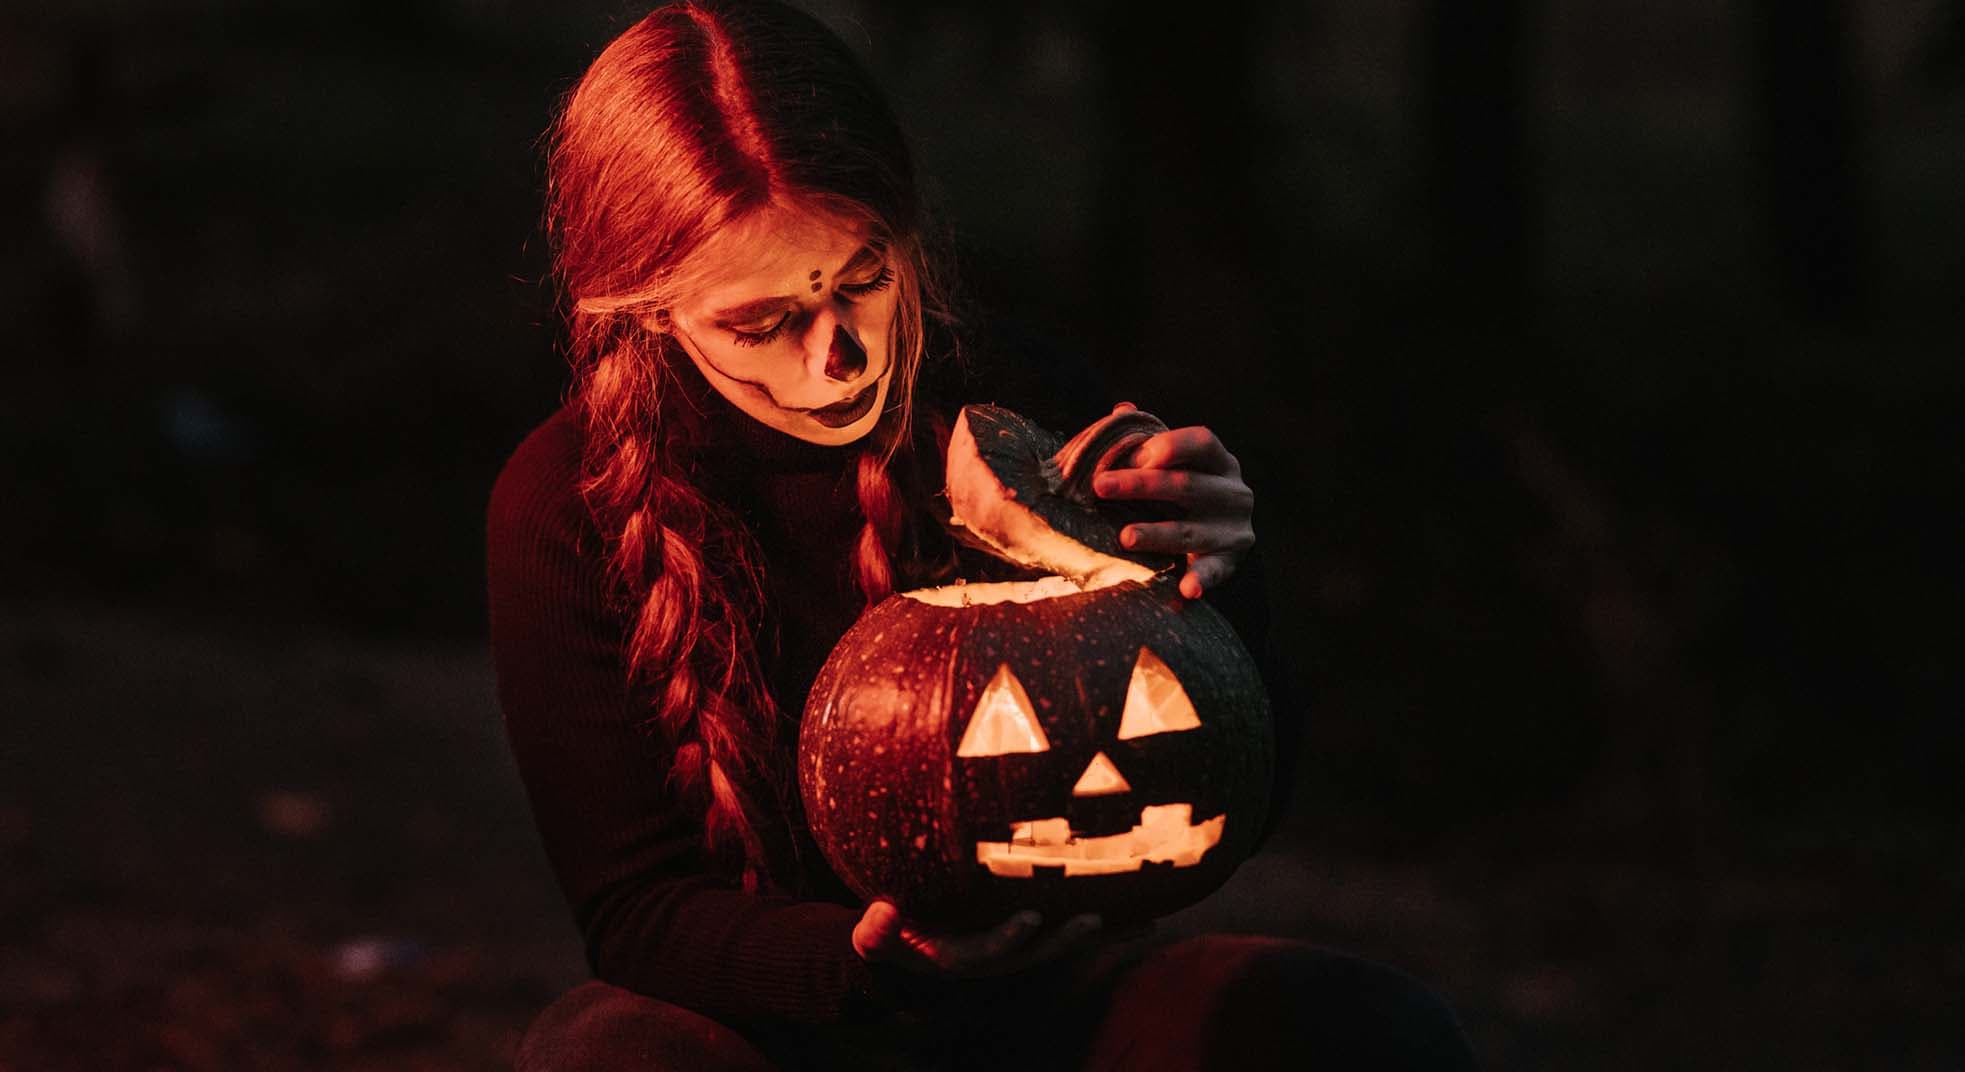 A girl dressed up for Halloween holding a pumpkin